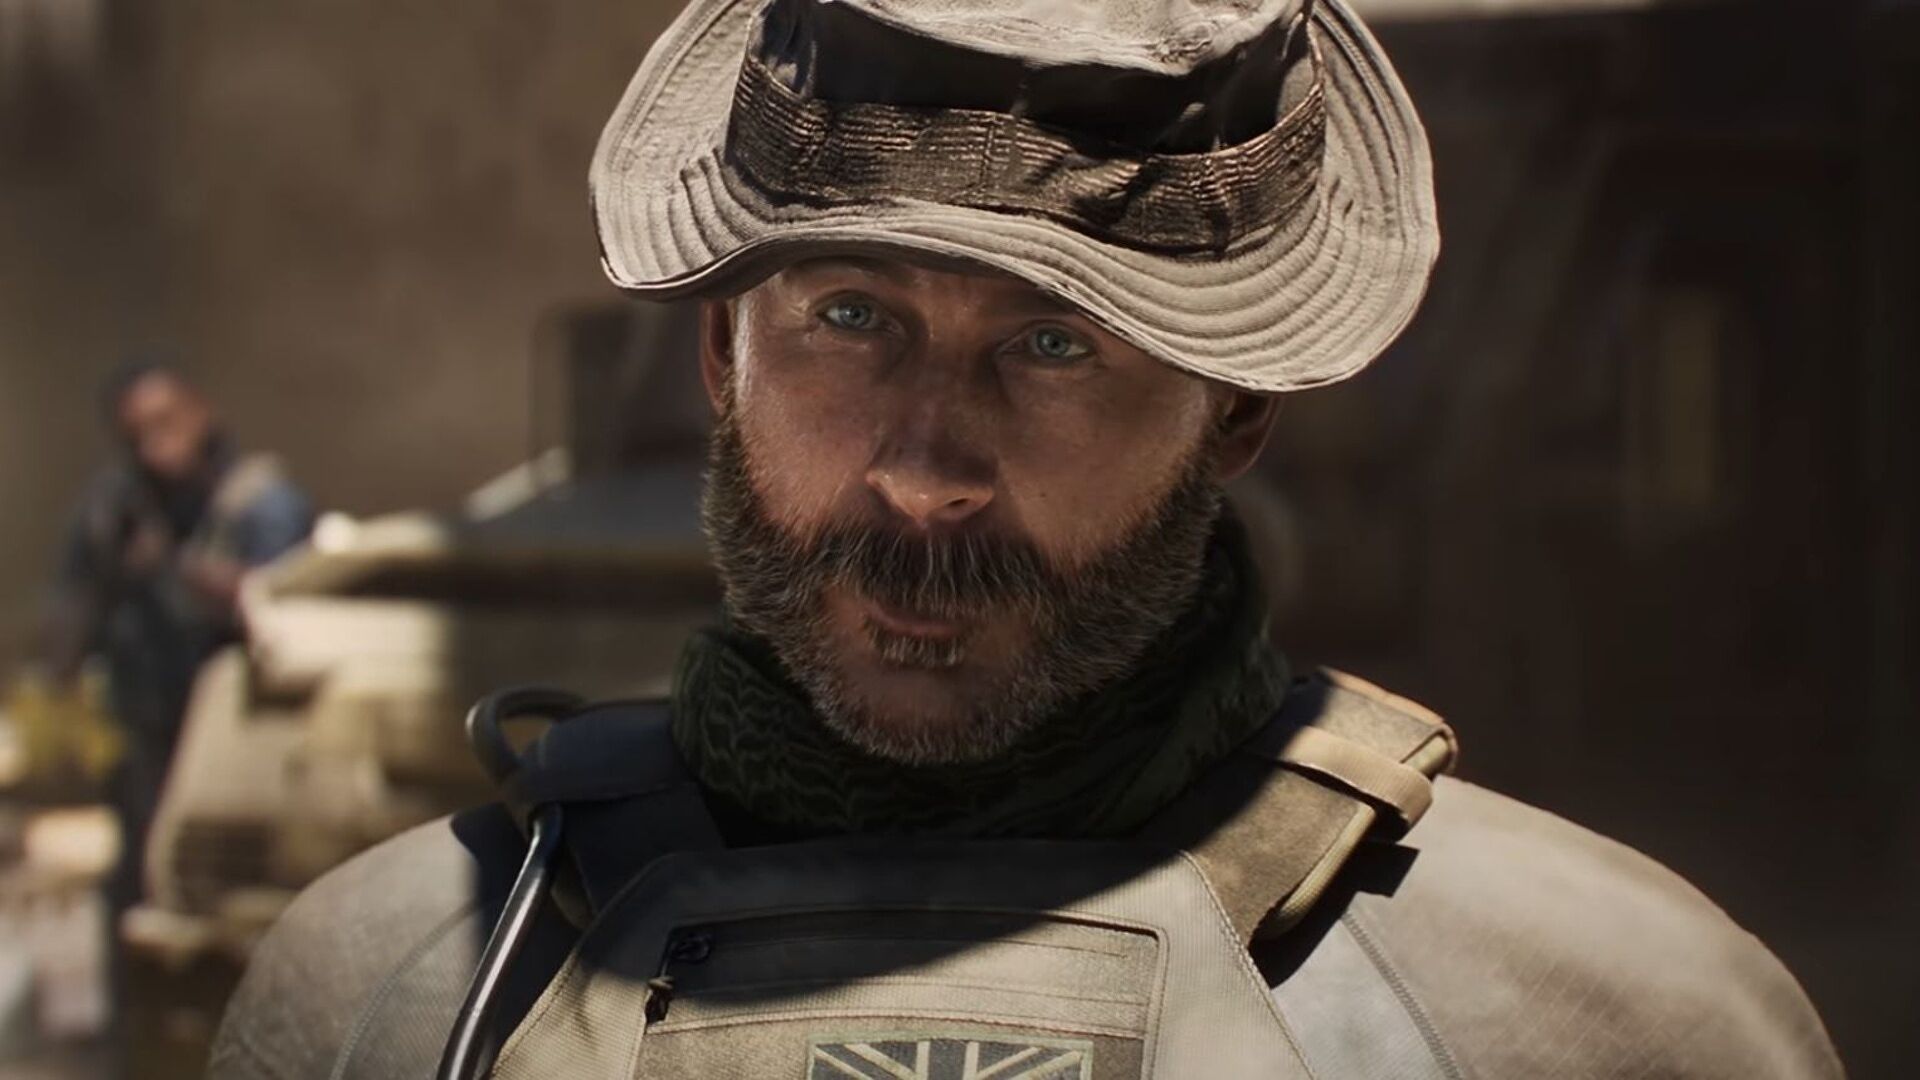 2023’s Call Of Duty will be a “full premium release”, whatever that means